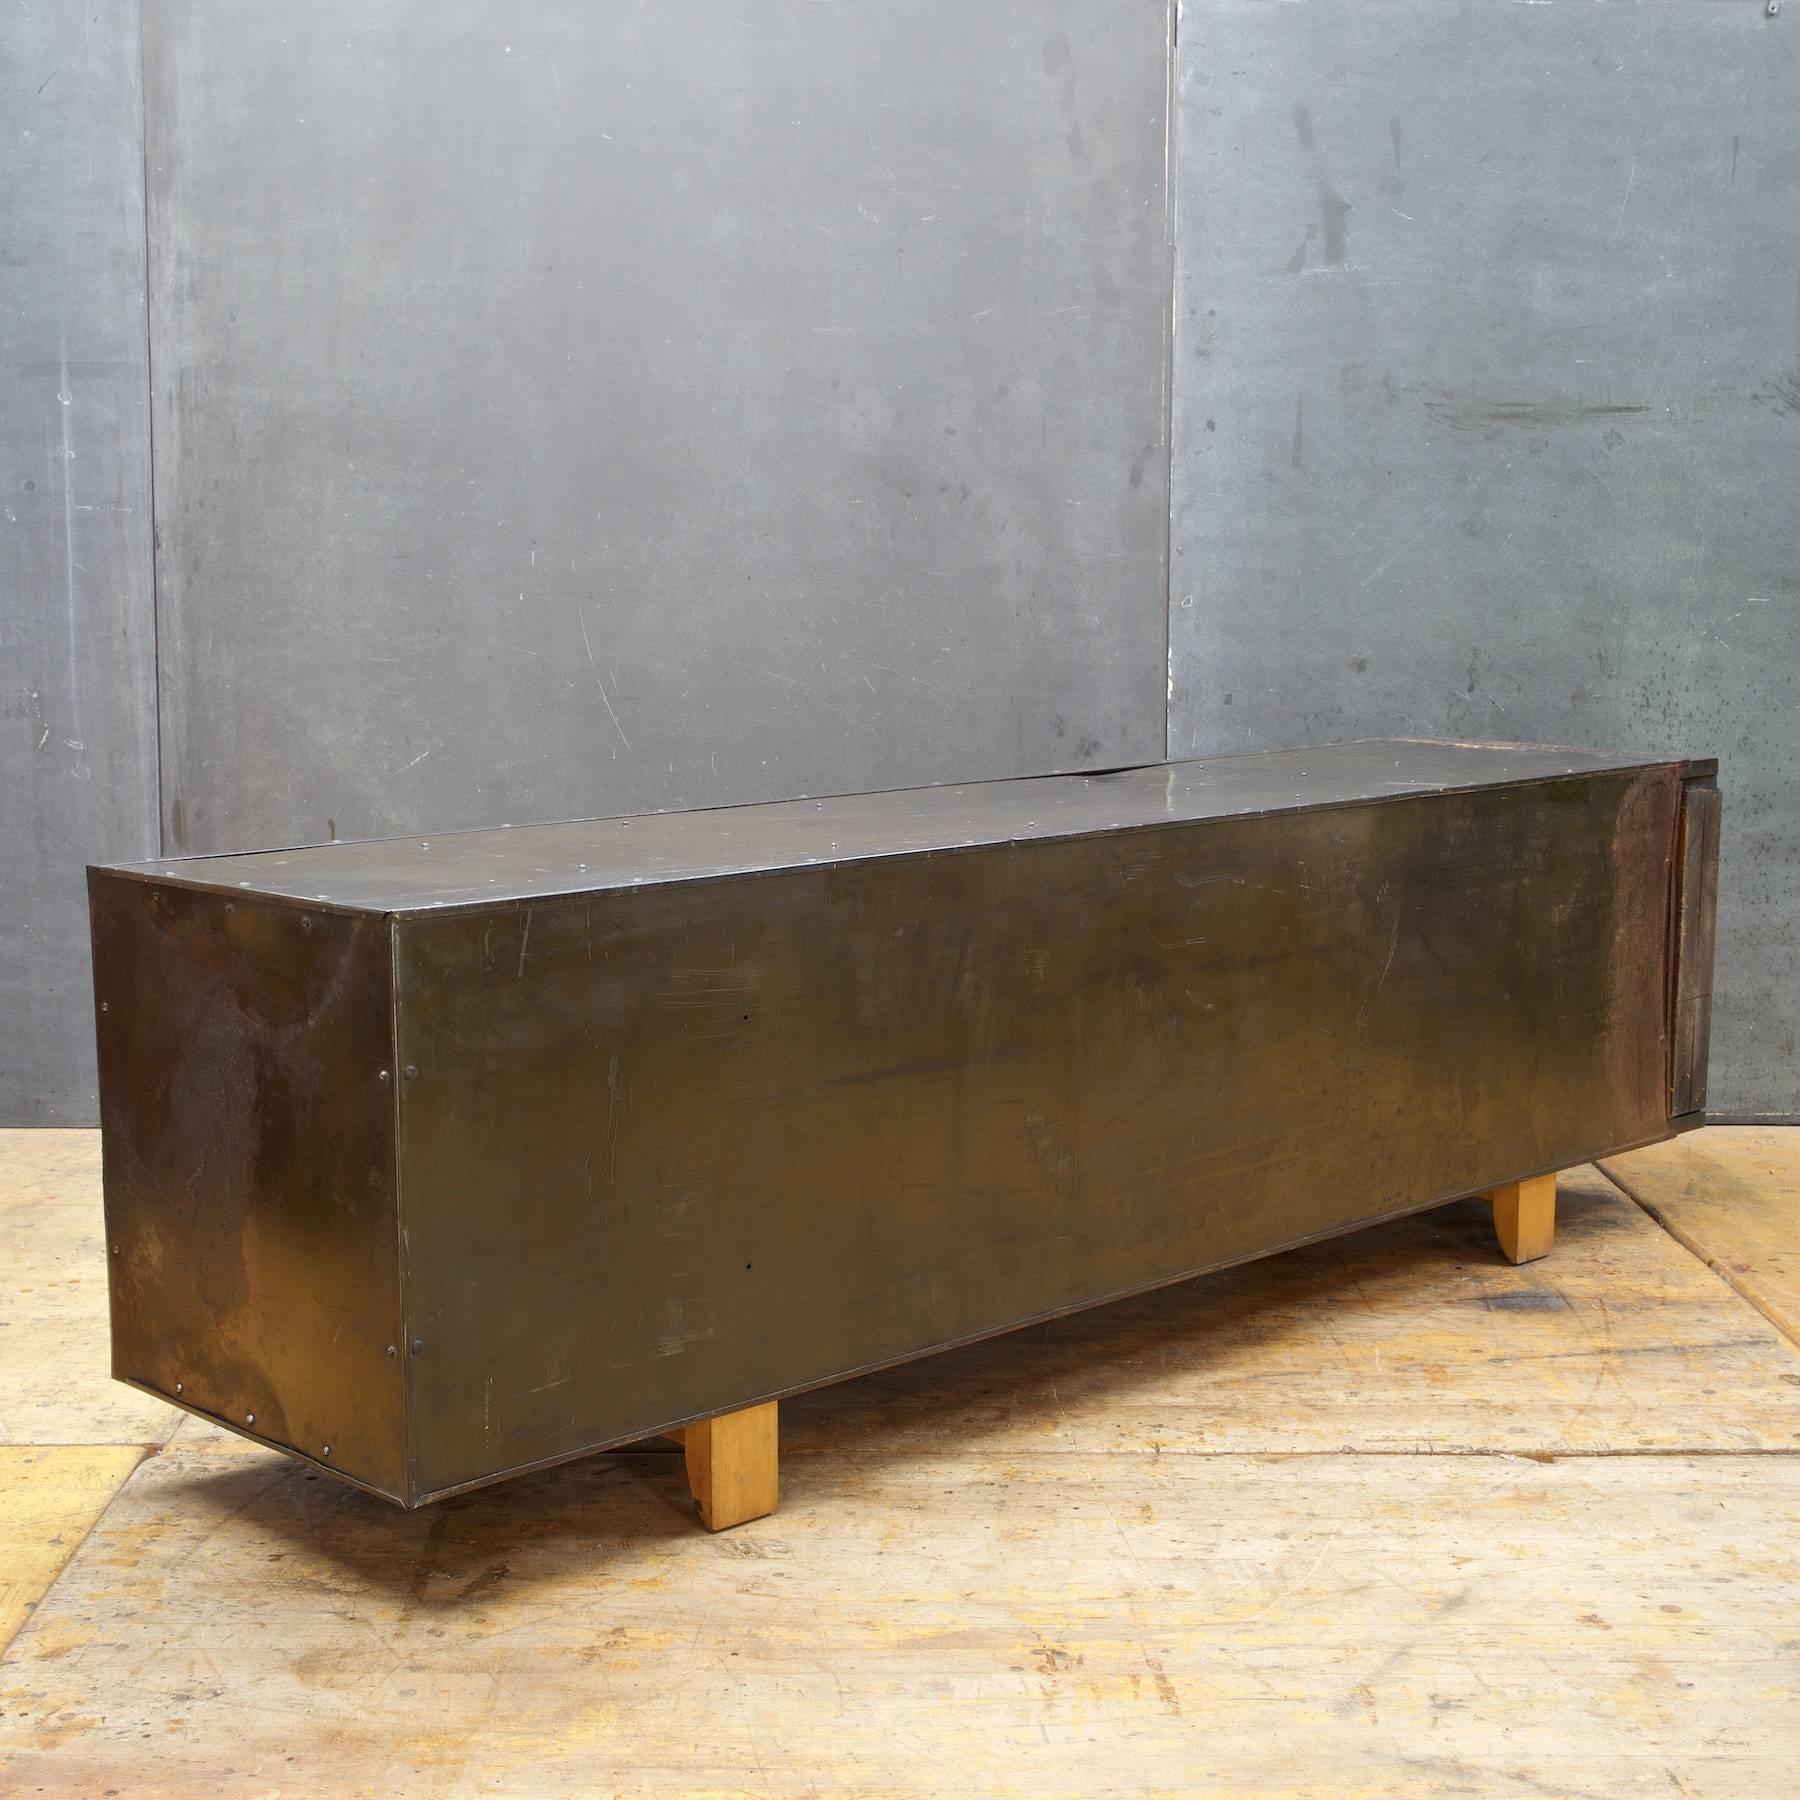 American Vintage Industrial Perforated Steel Media Console Assemblage Credenza Cabinet